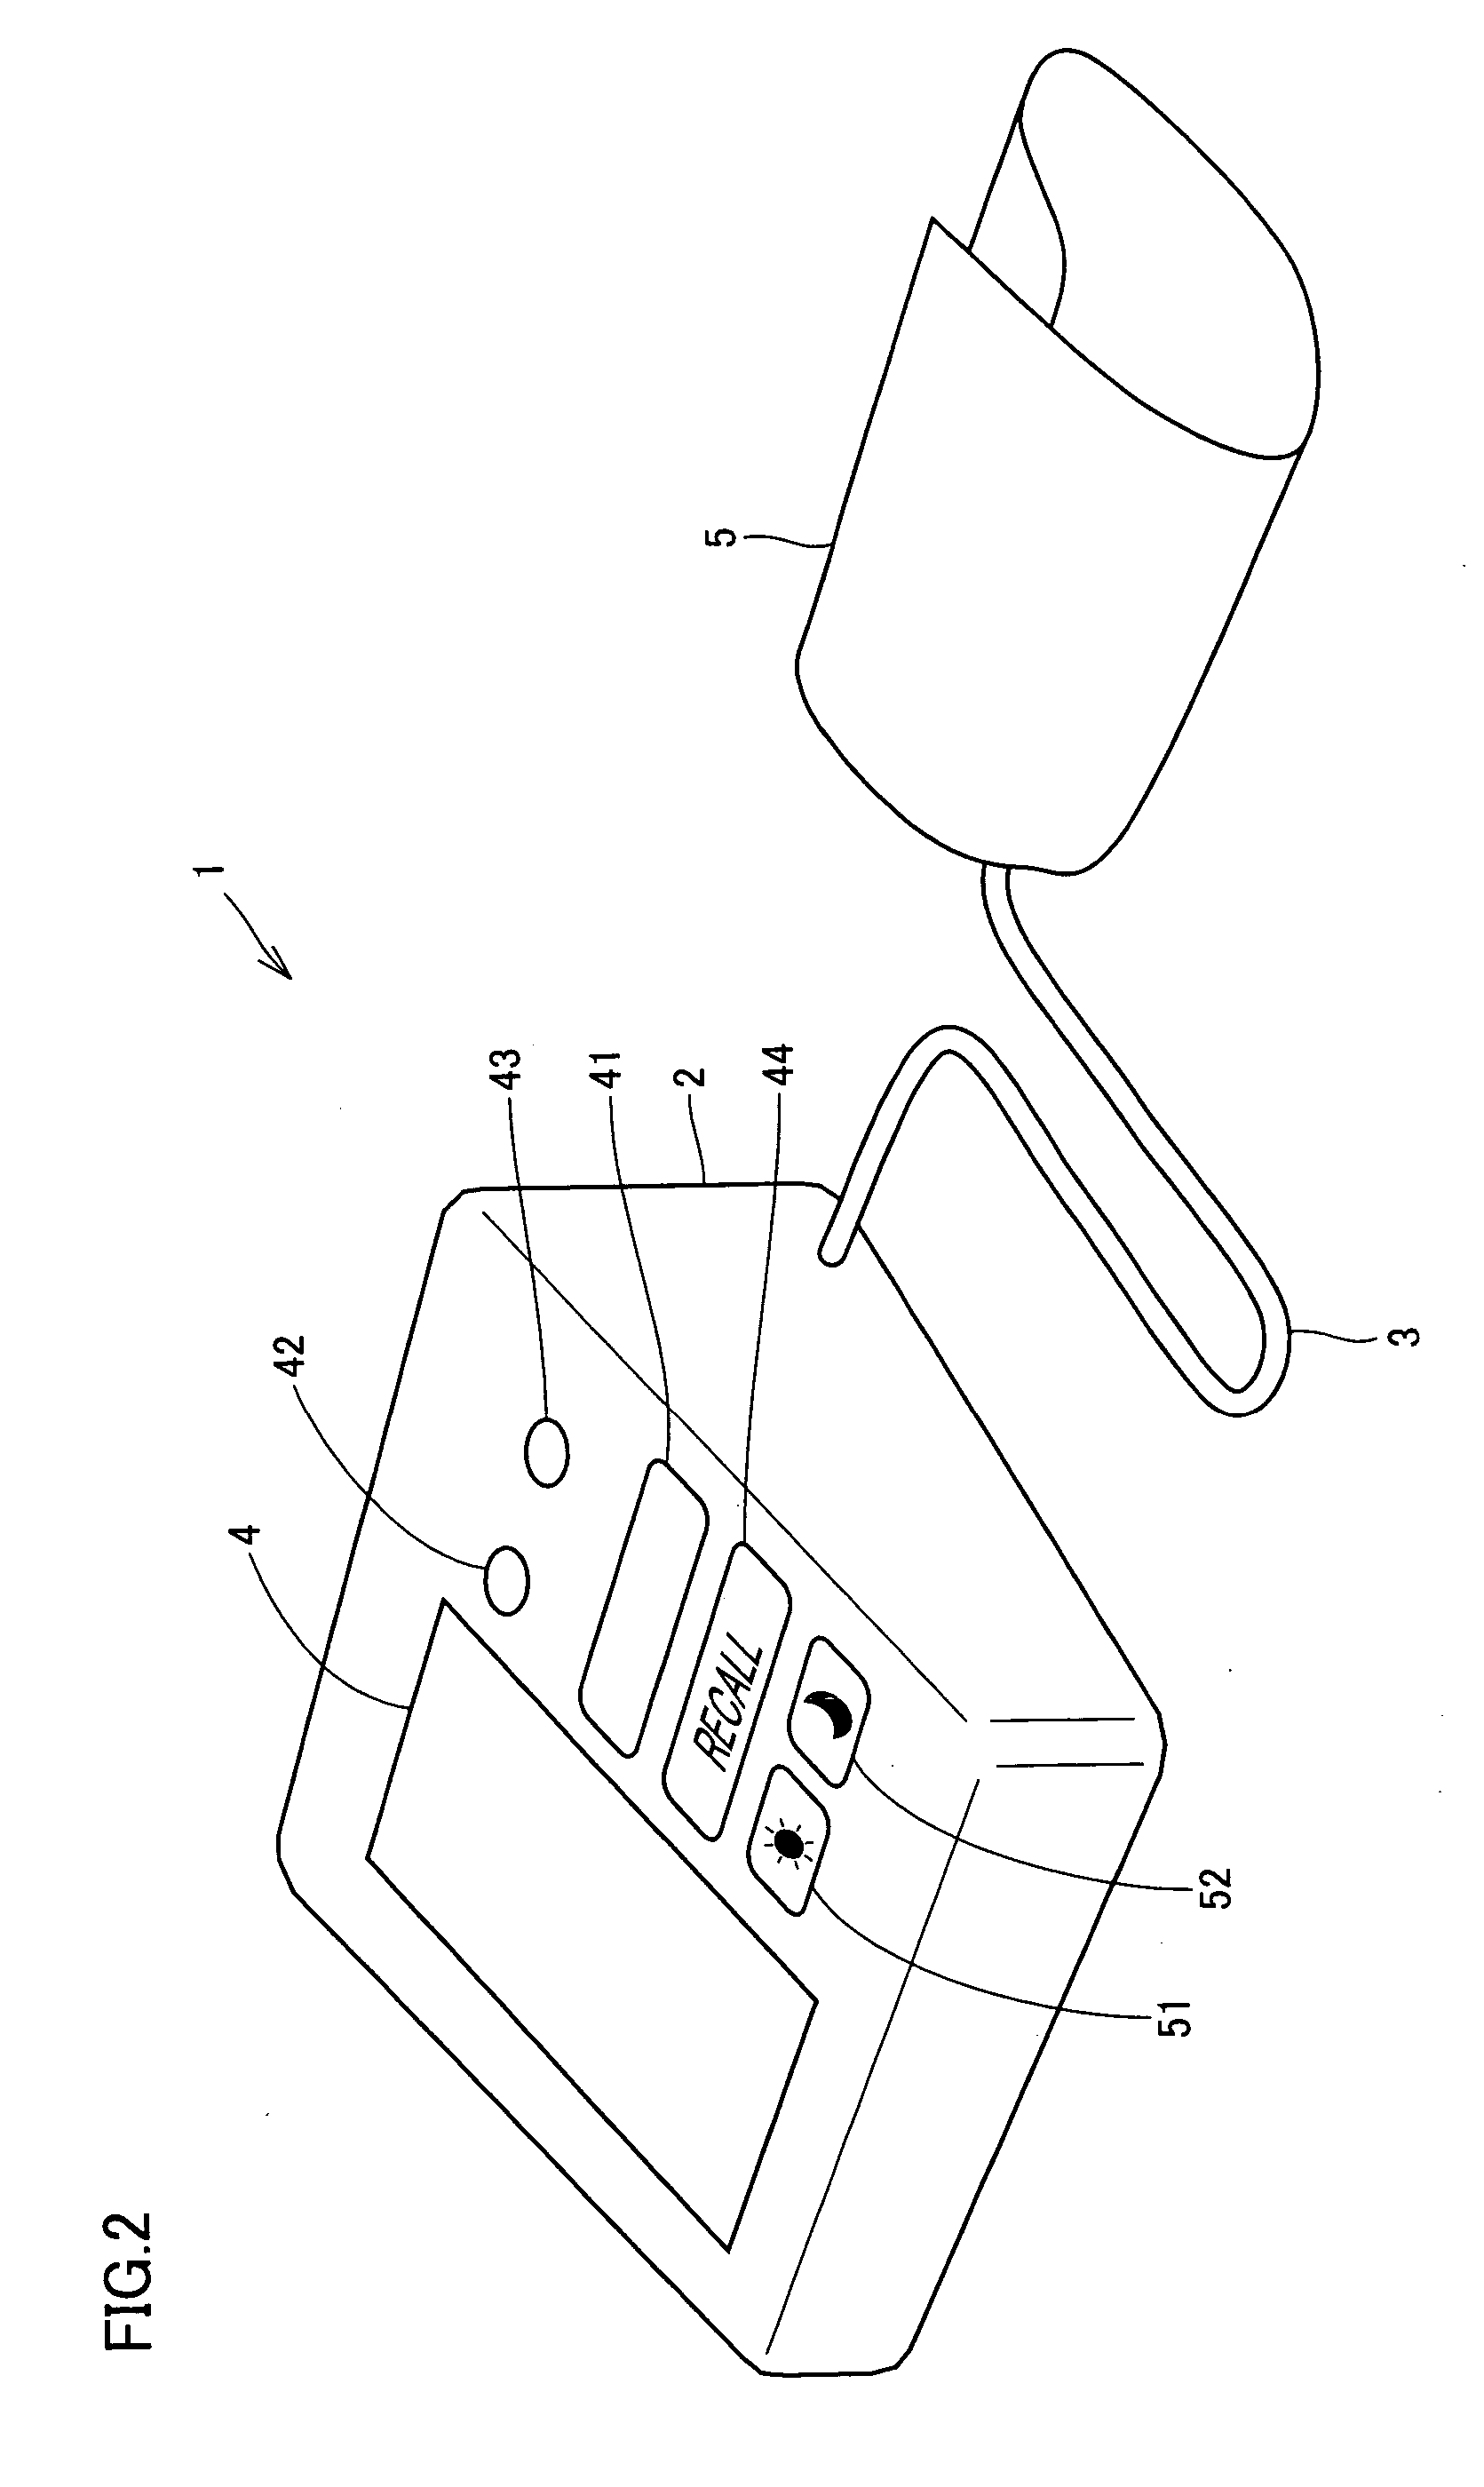 Electronic blood pressure monitor & data processing apparatus